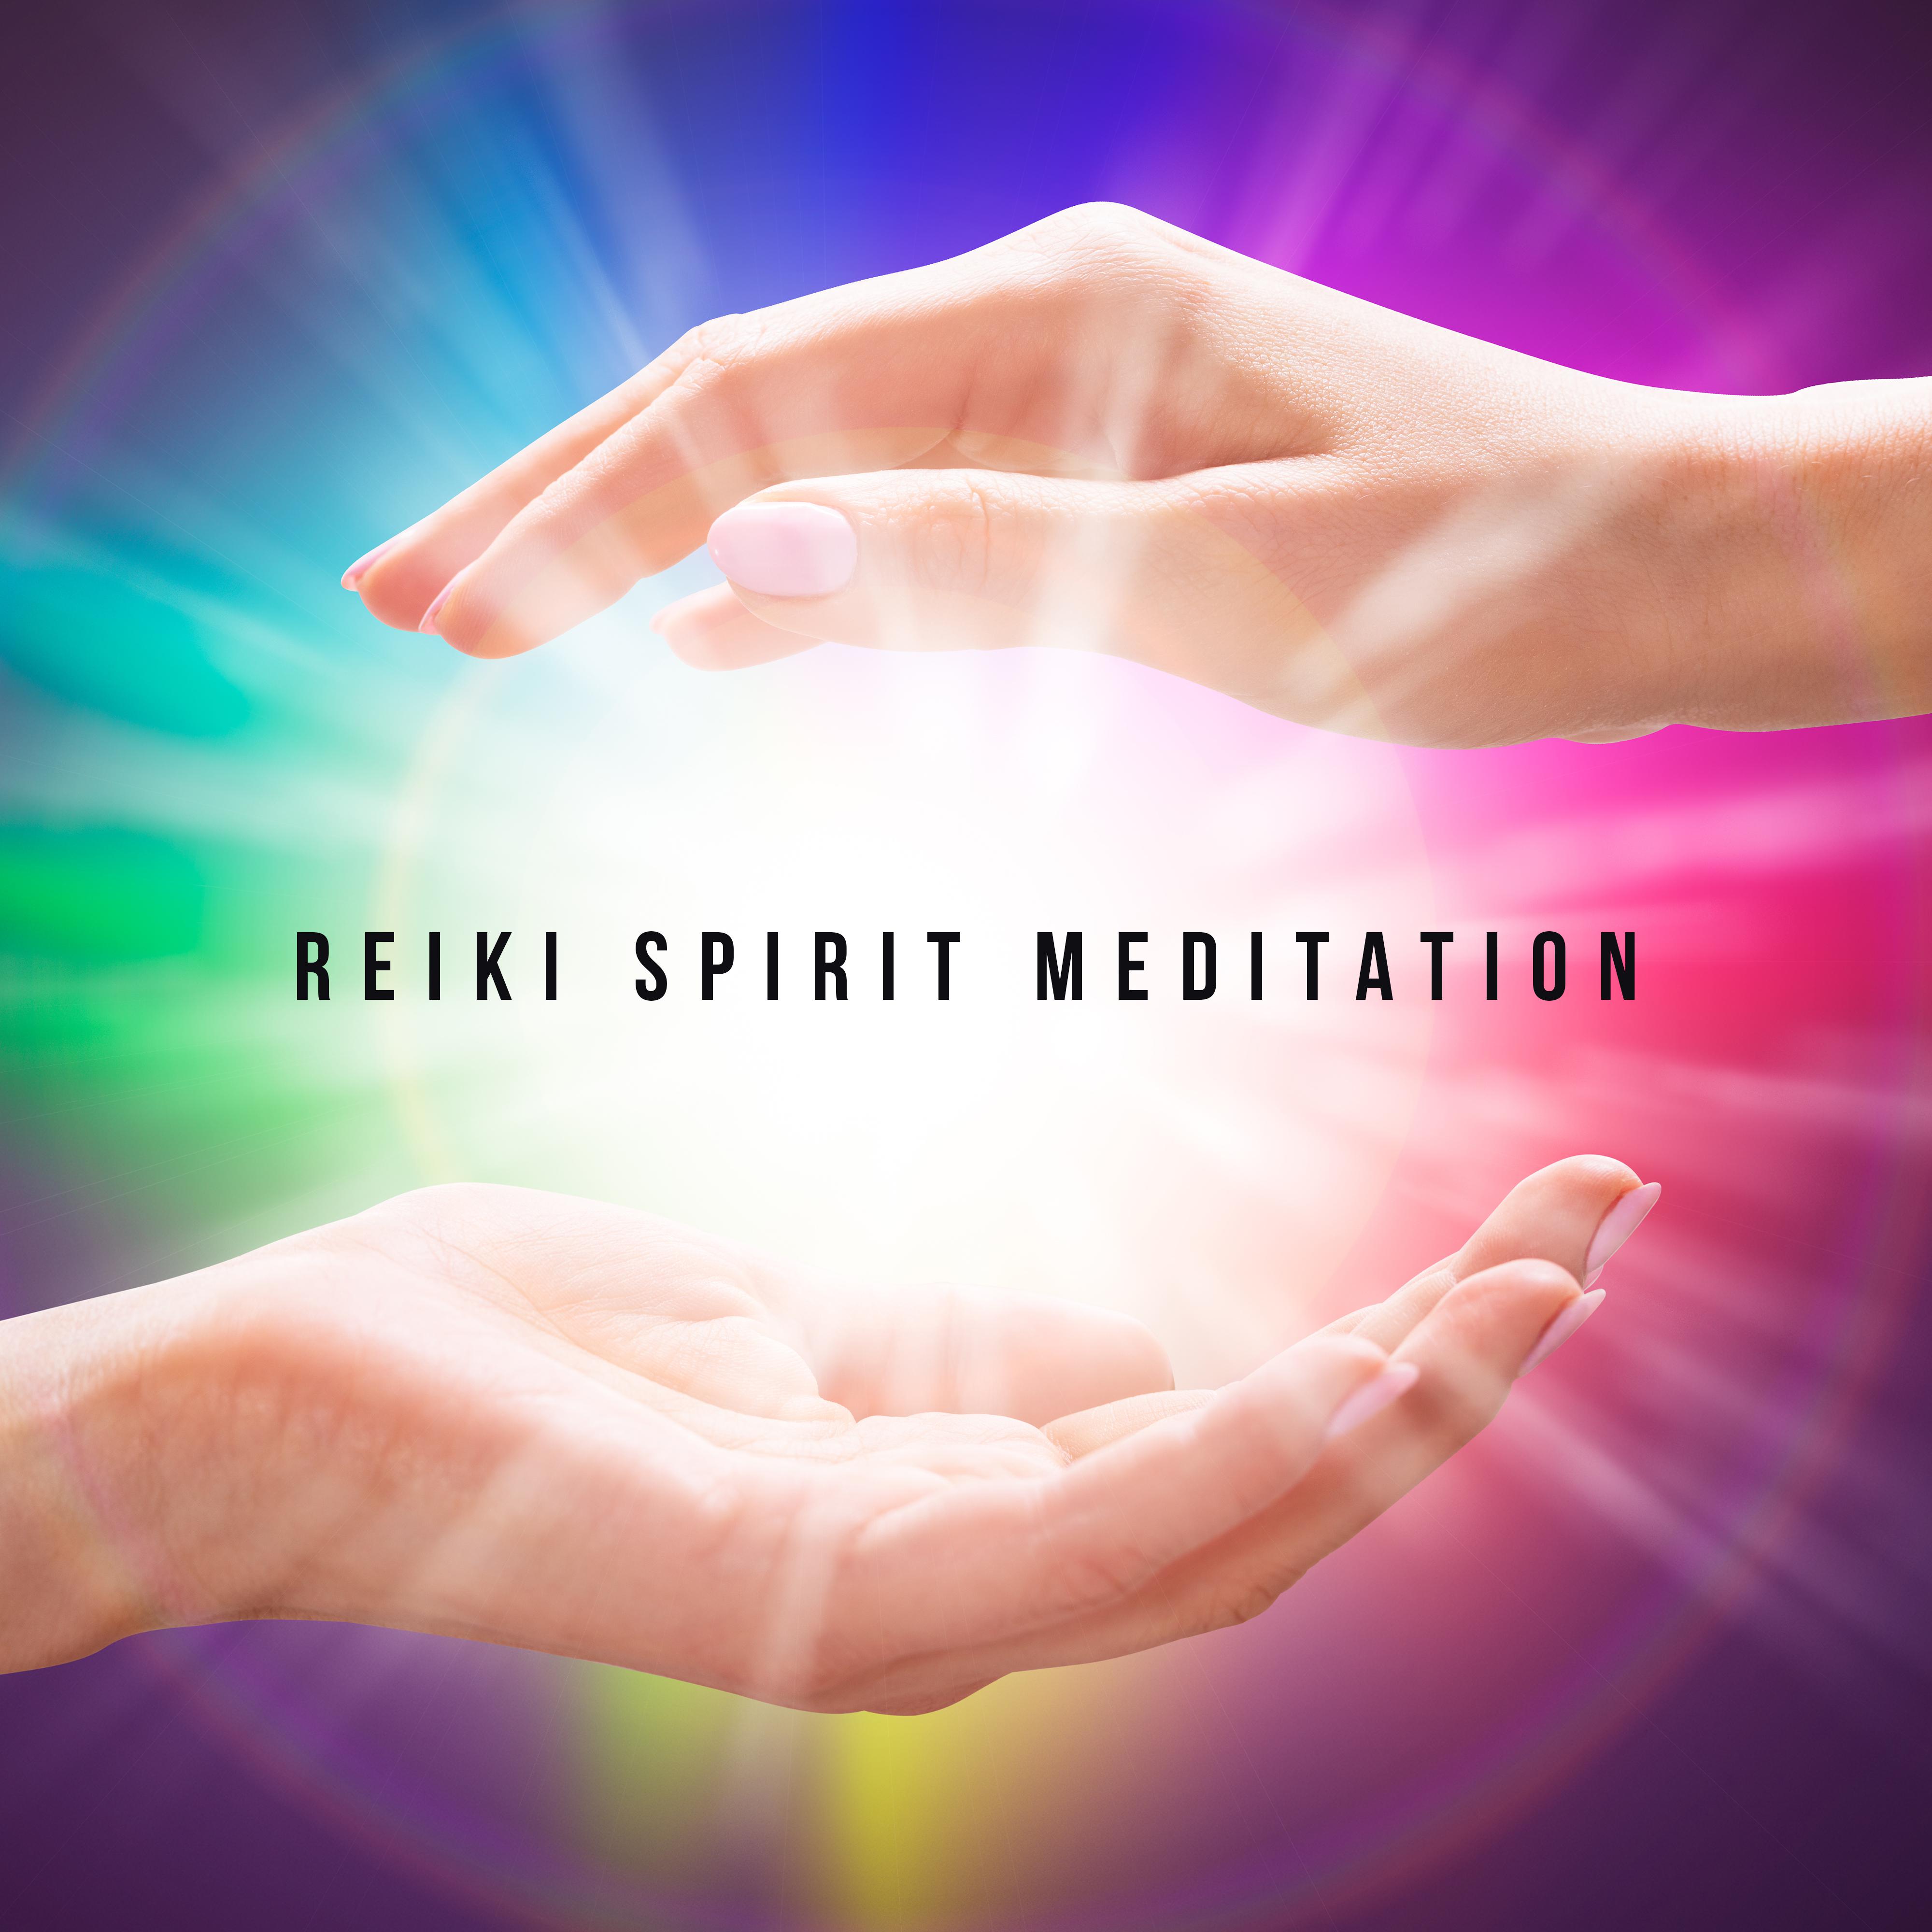 Reiki Spirit Meditation: 2019 New Age Ambient Music for Yoga Session & Deep Relaxation, Mantra Songs, Calming Zen